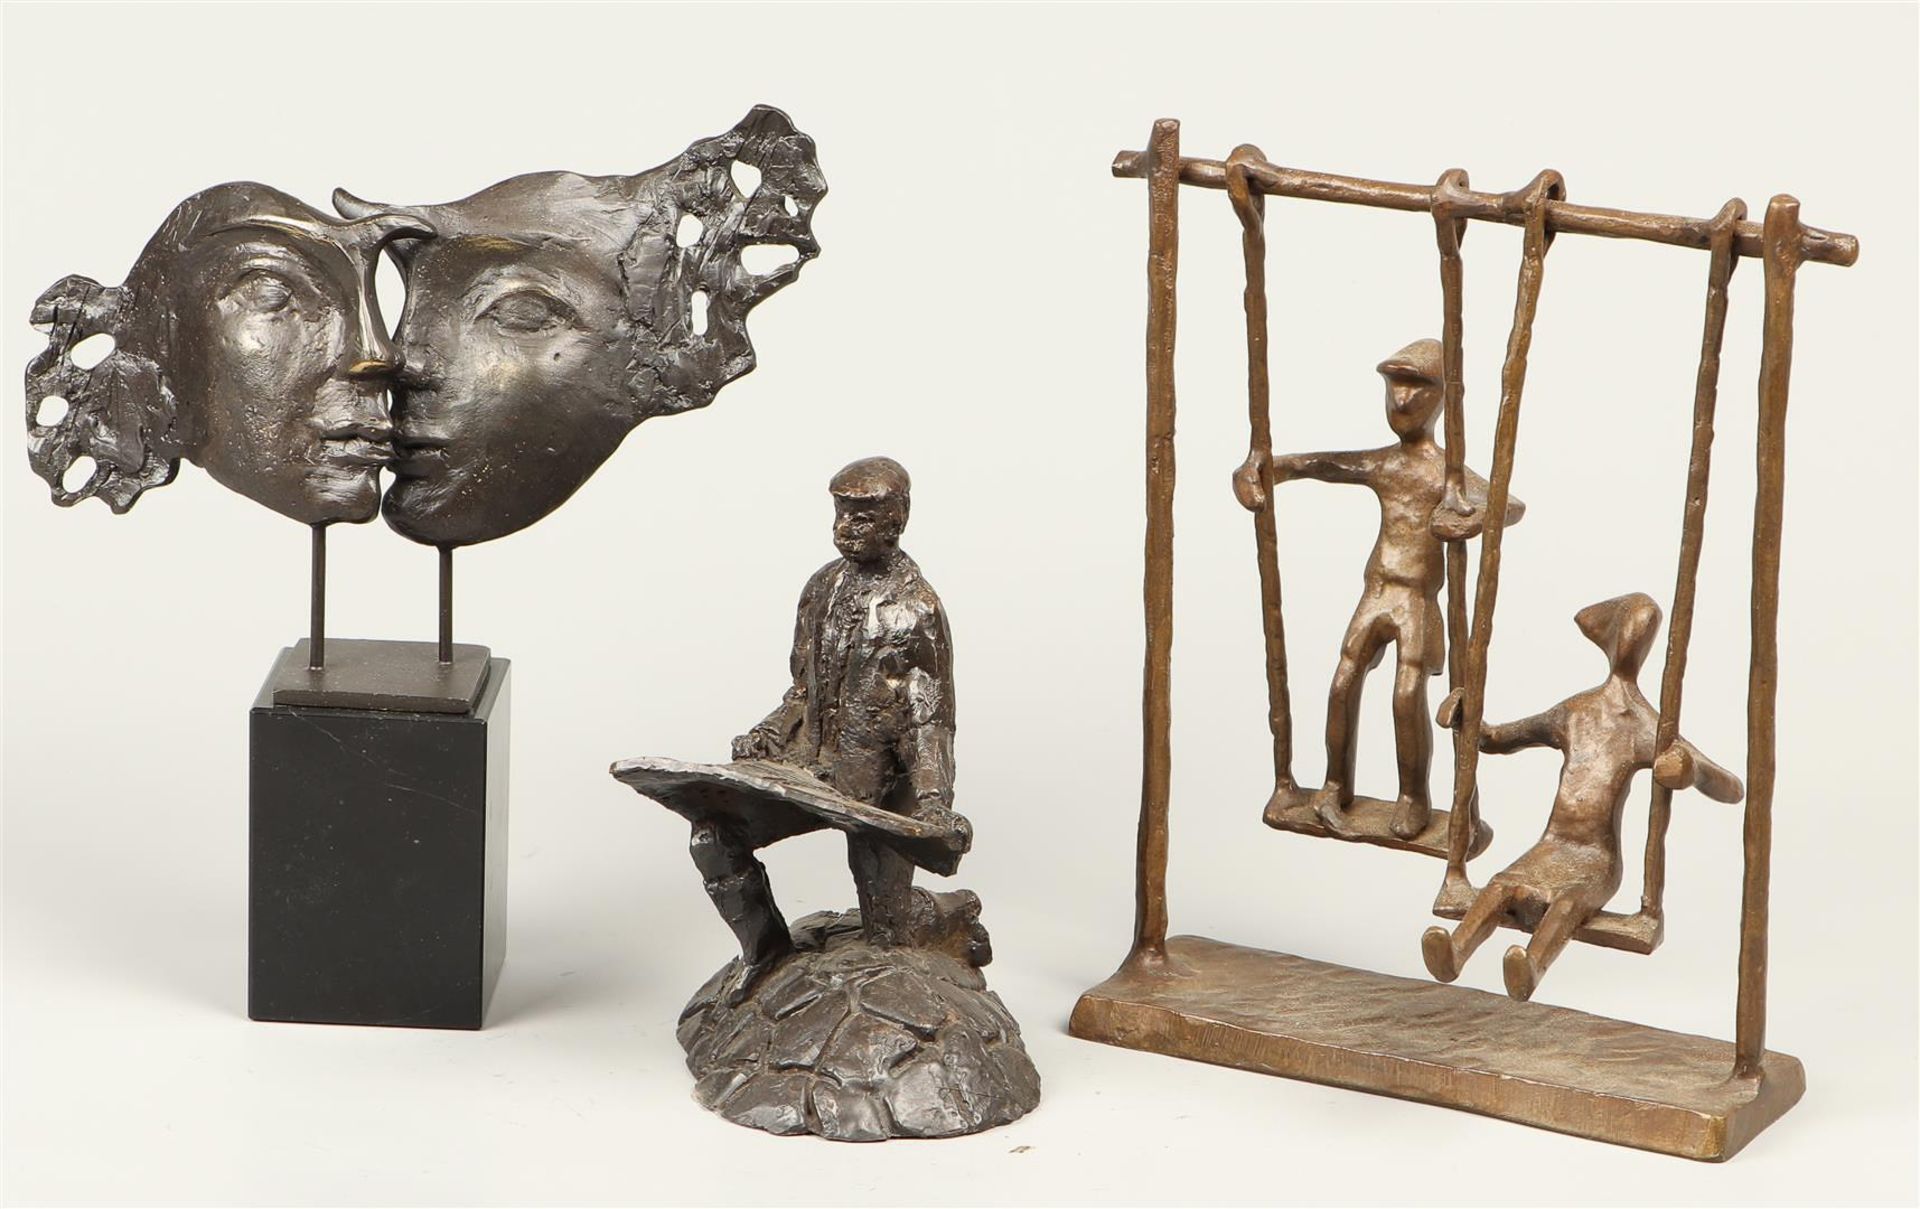 and three decorative bronze statuettes of rockers, two heads, and a dike warden.